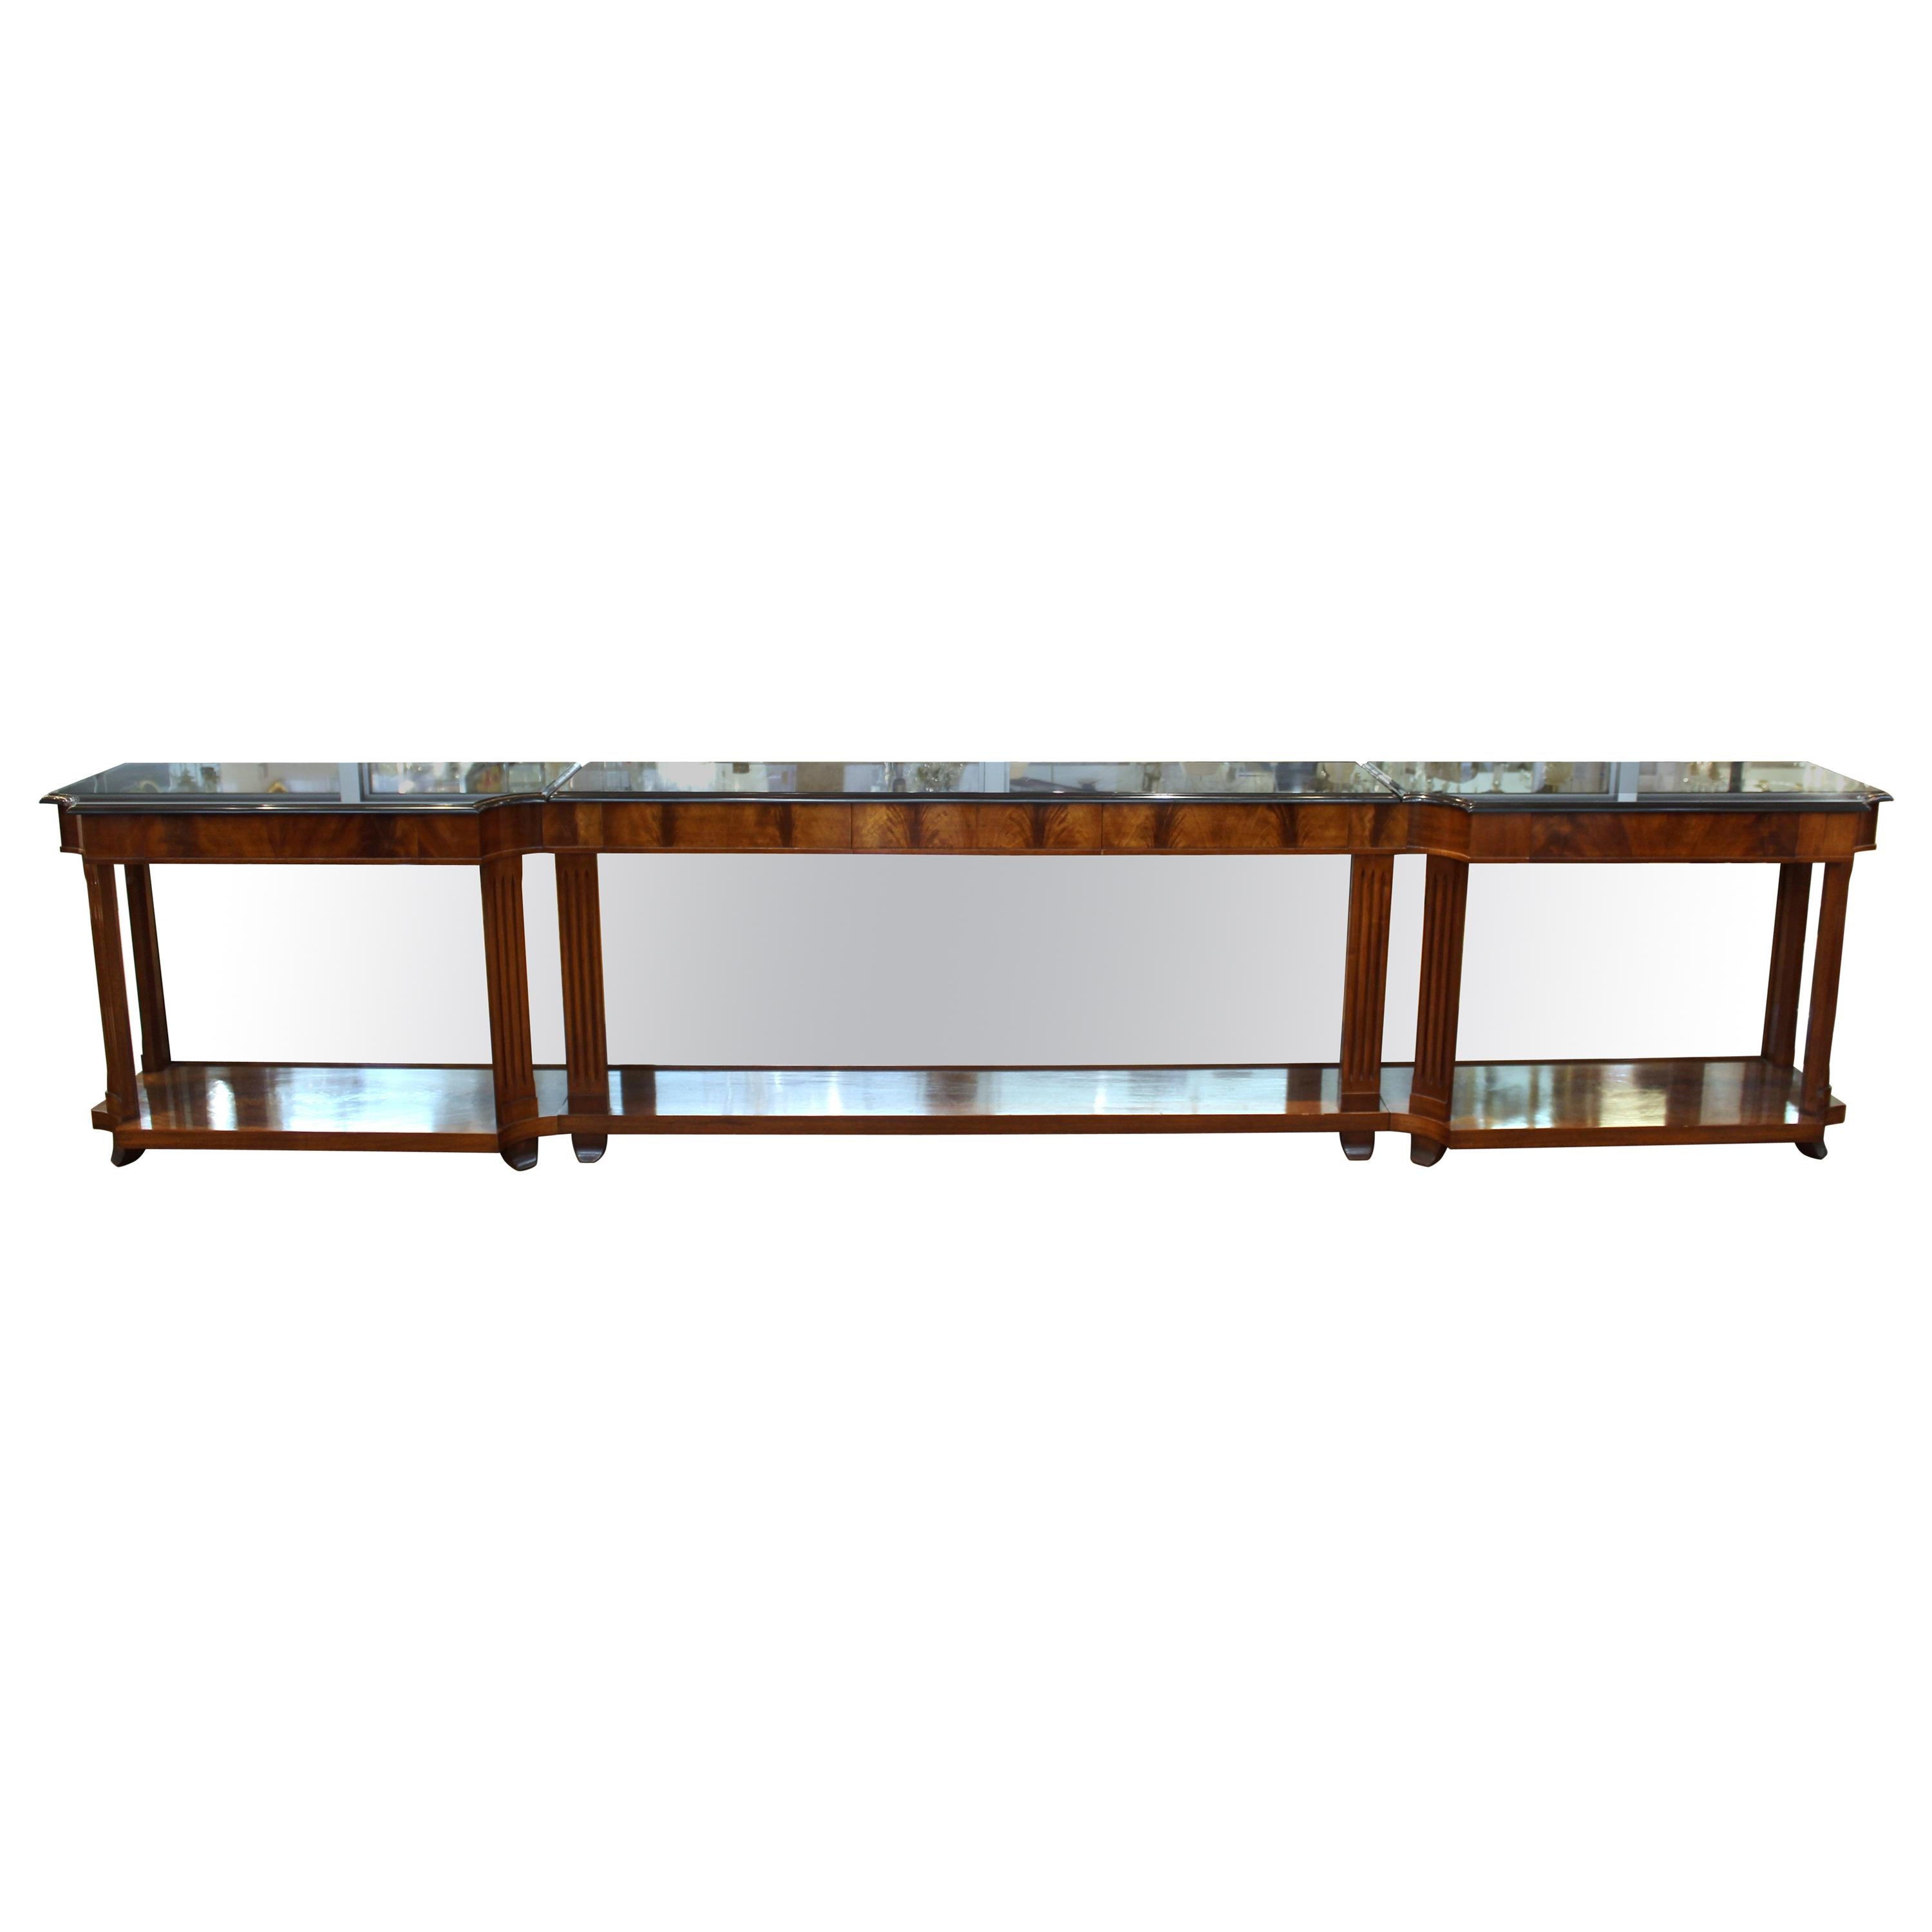 Grosfeld House Empire Style Mirrored Mahogany Console with Marble Tops